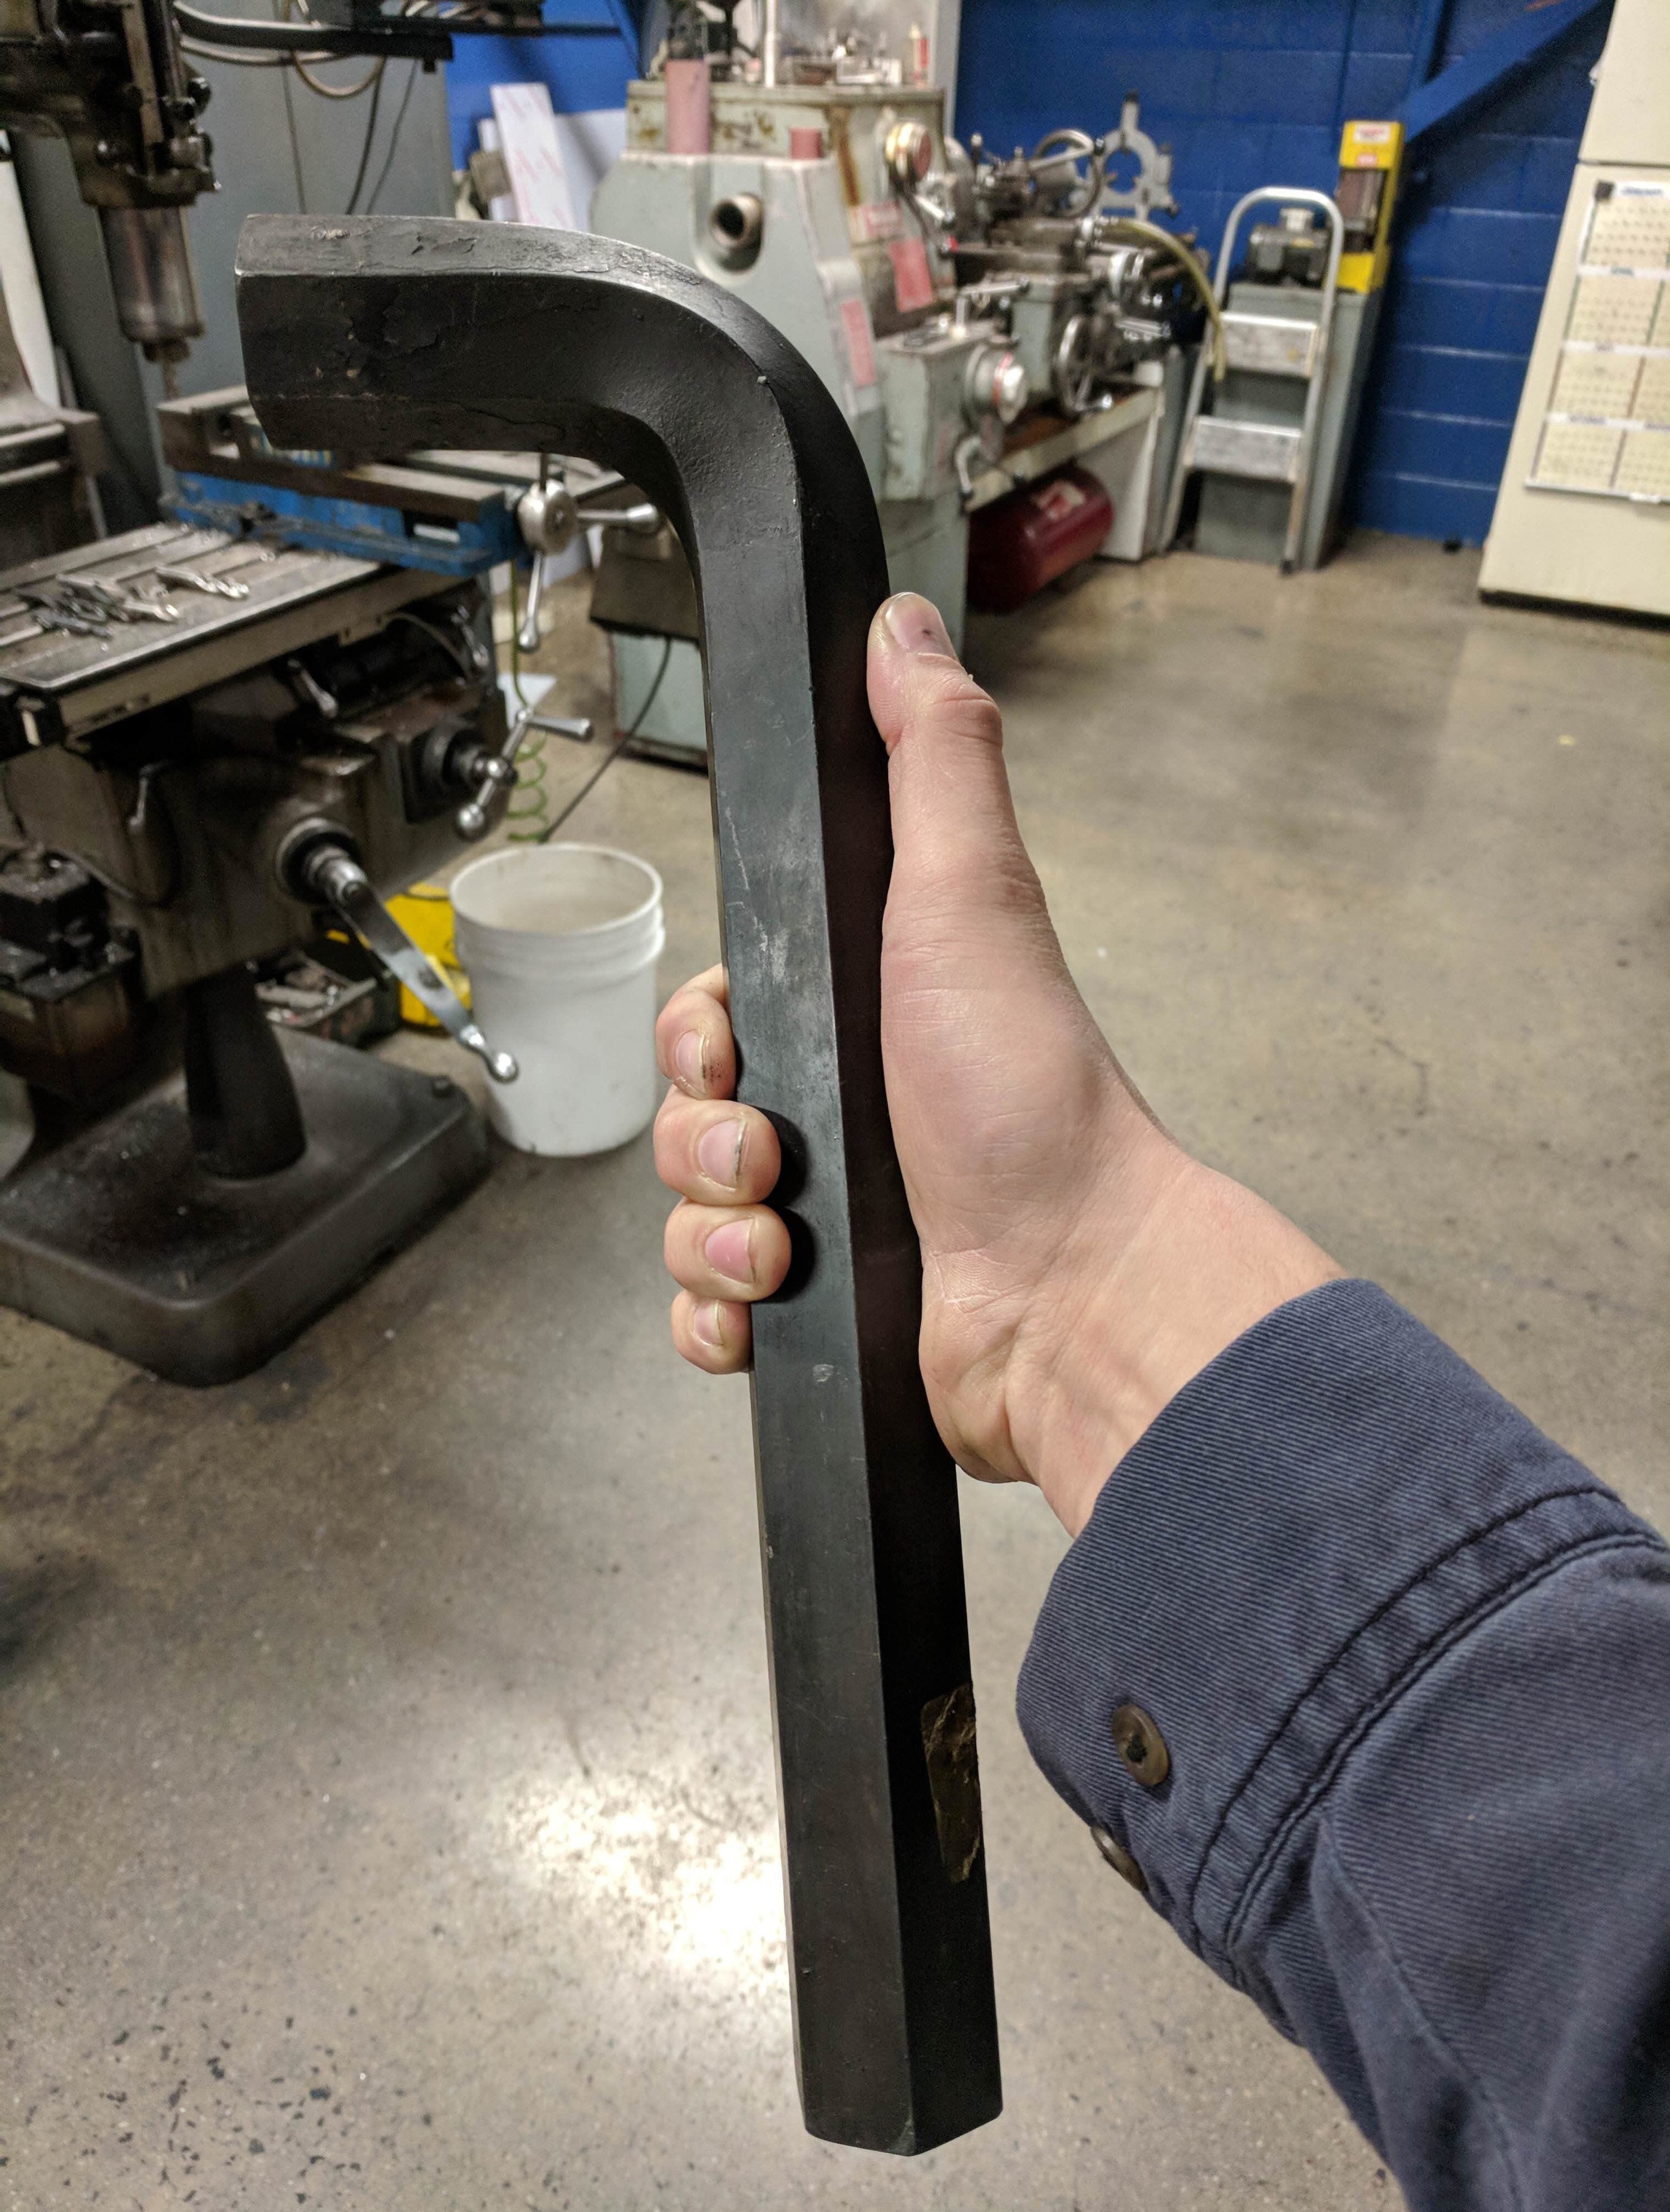 A giant Allen wrench